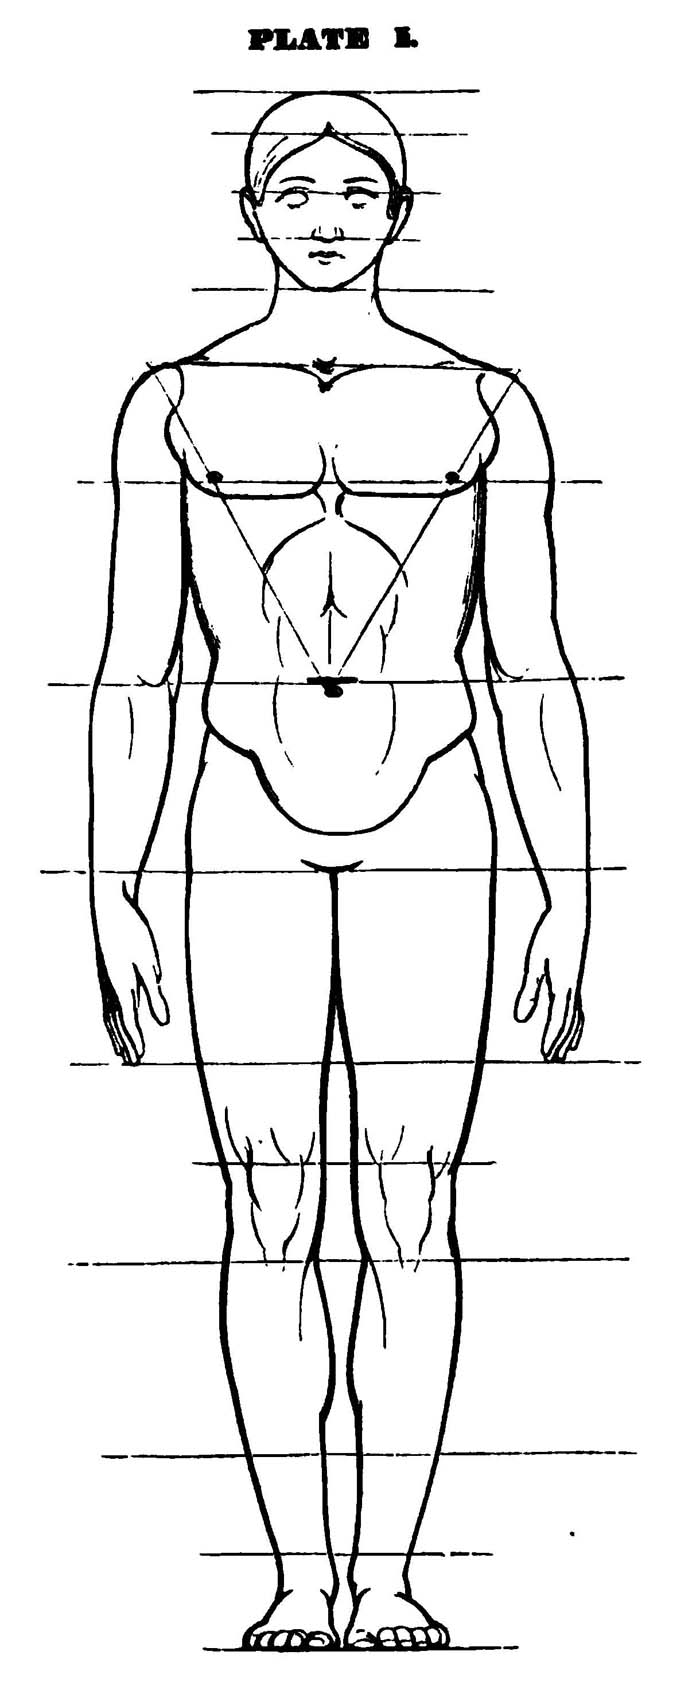 Drawing the Human Head , Face, and Body in the Correct Proportions